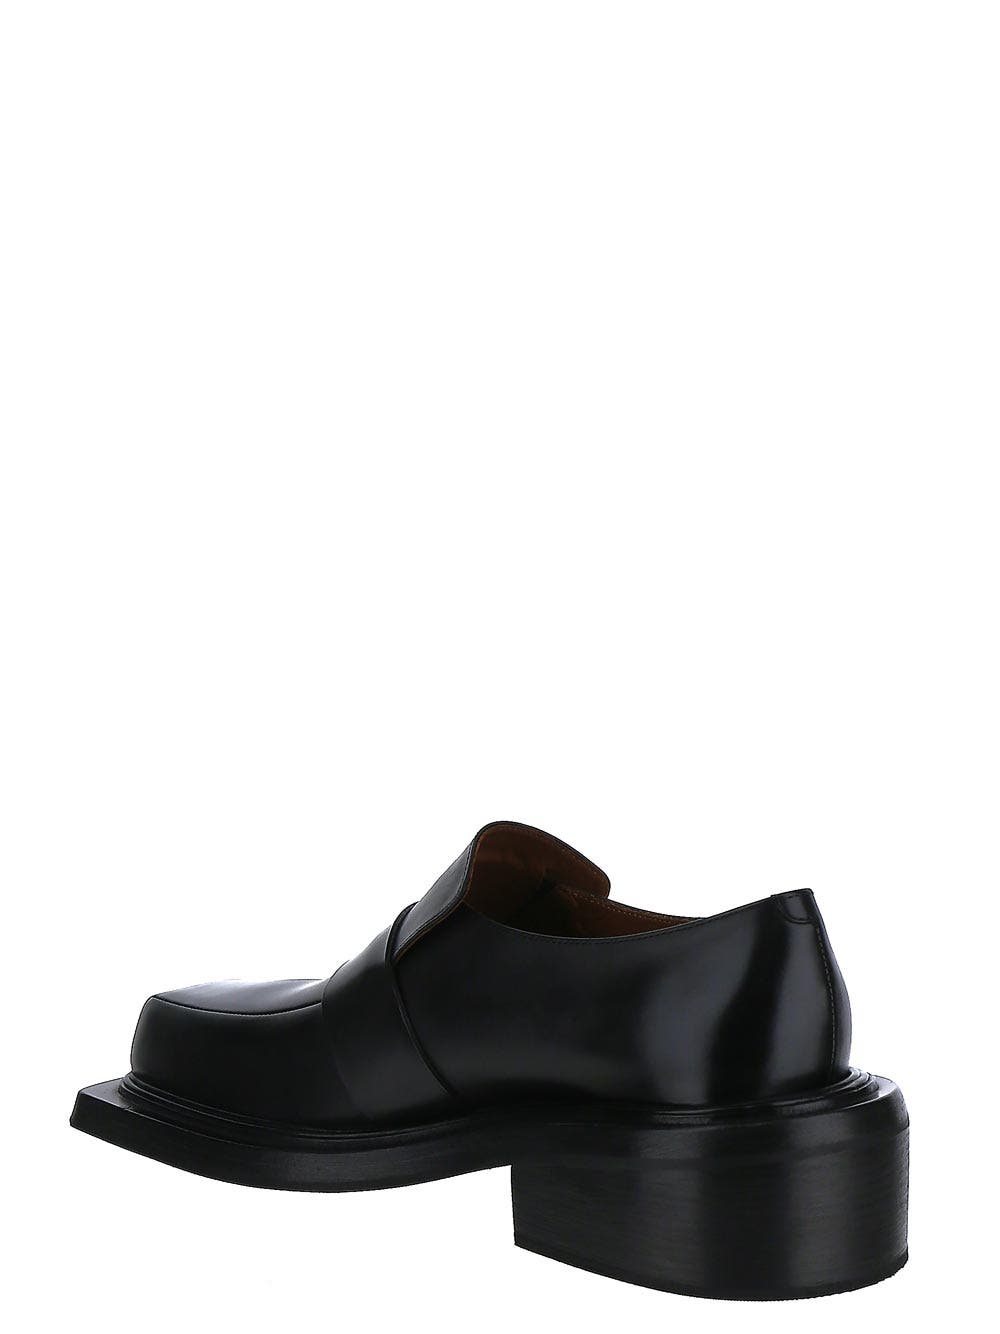 Black Loafers - 3